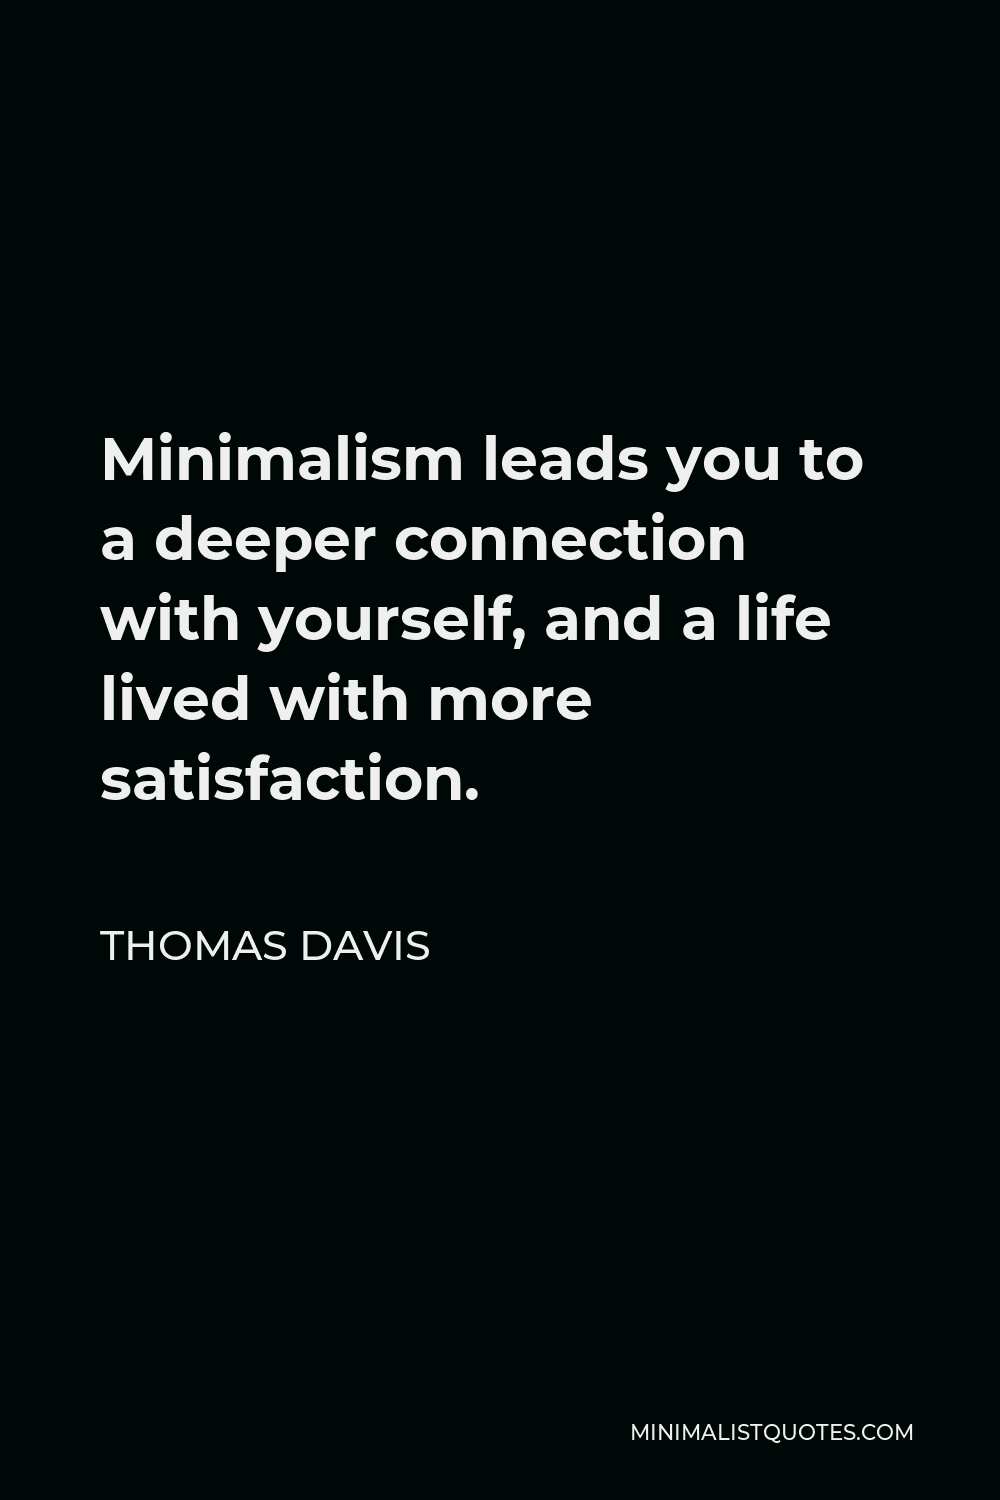 Thomas Davis Quote - Minimalism leads you to a deeper connection with yourself, and a life lived with more satisfaction.